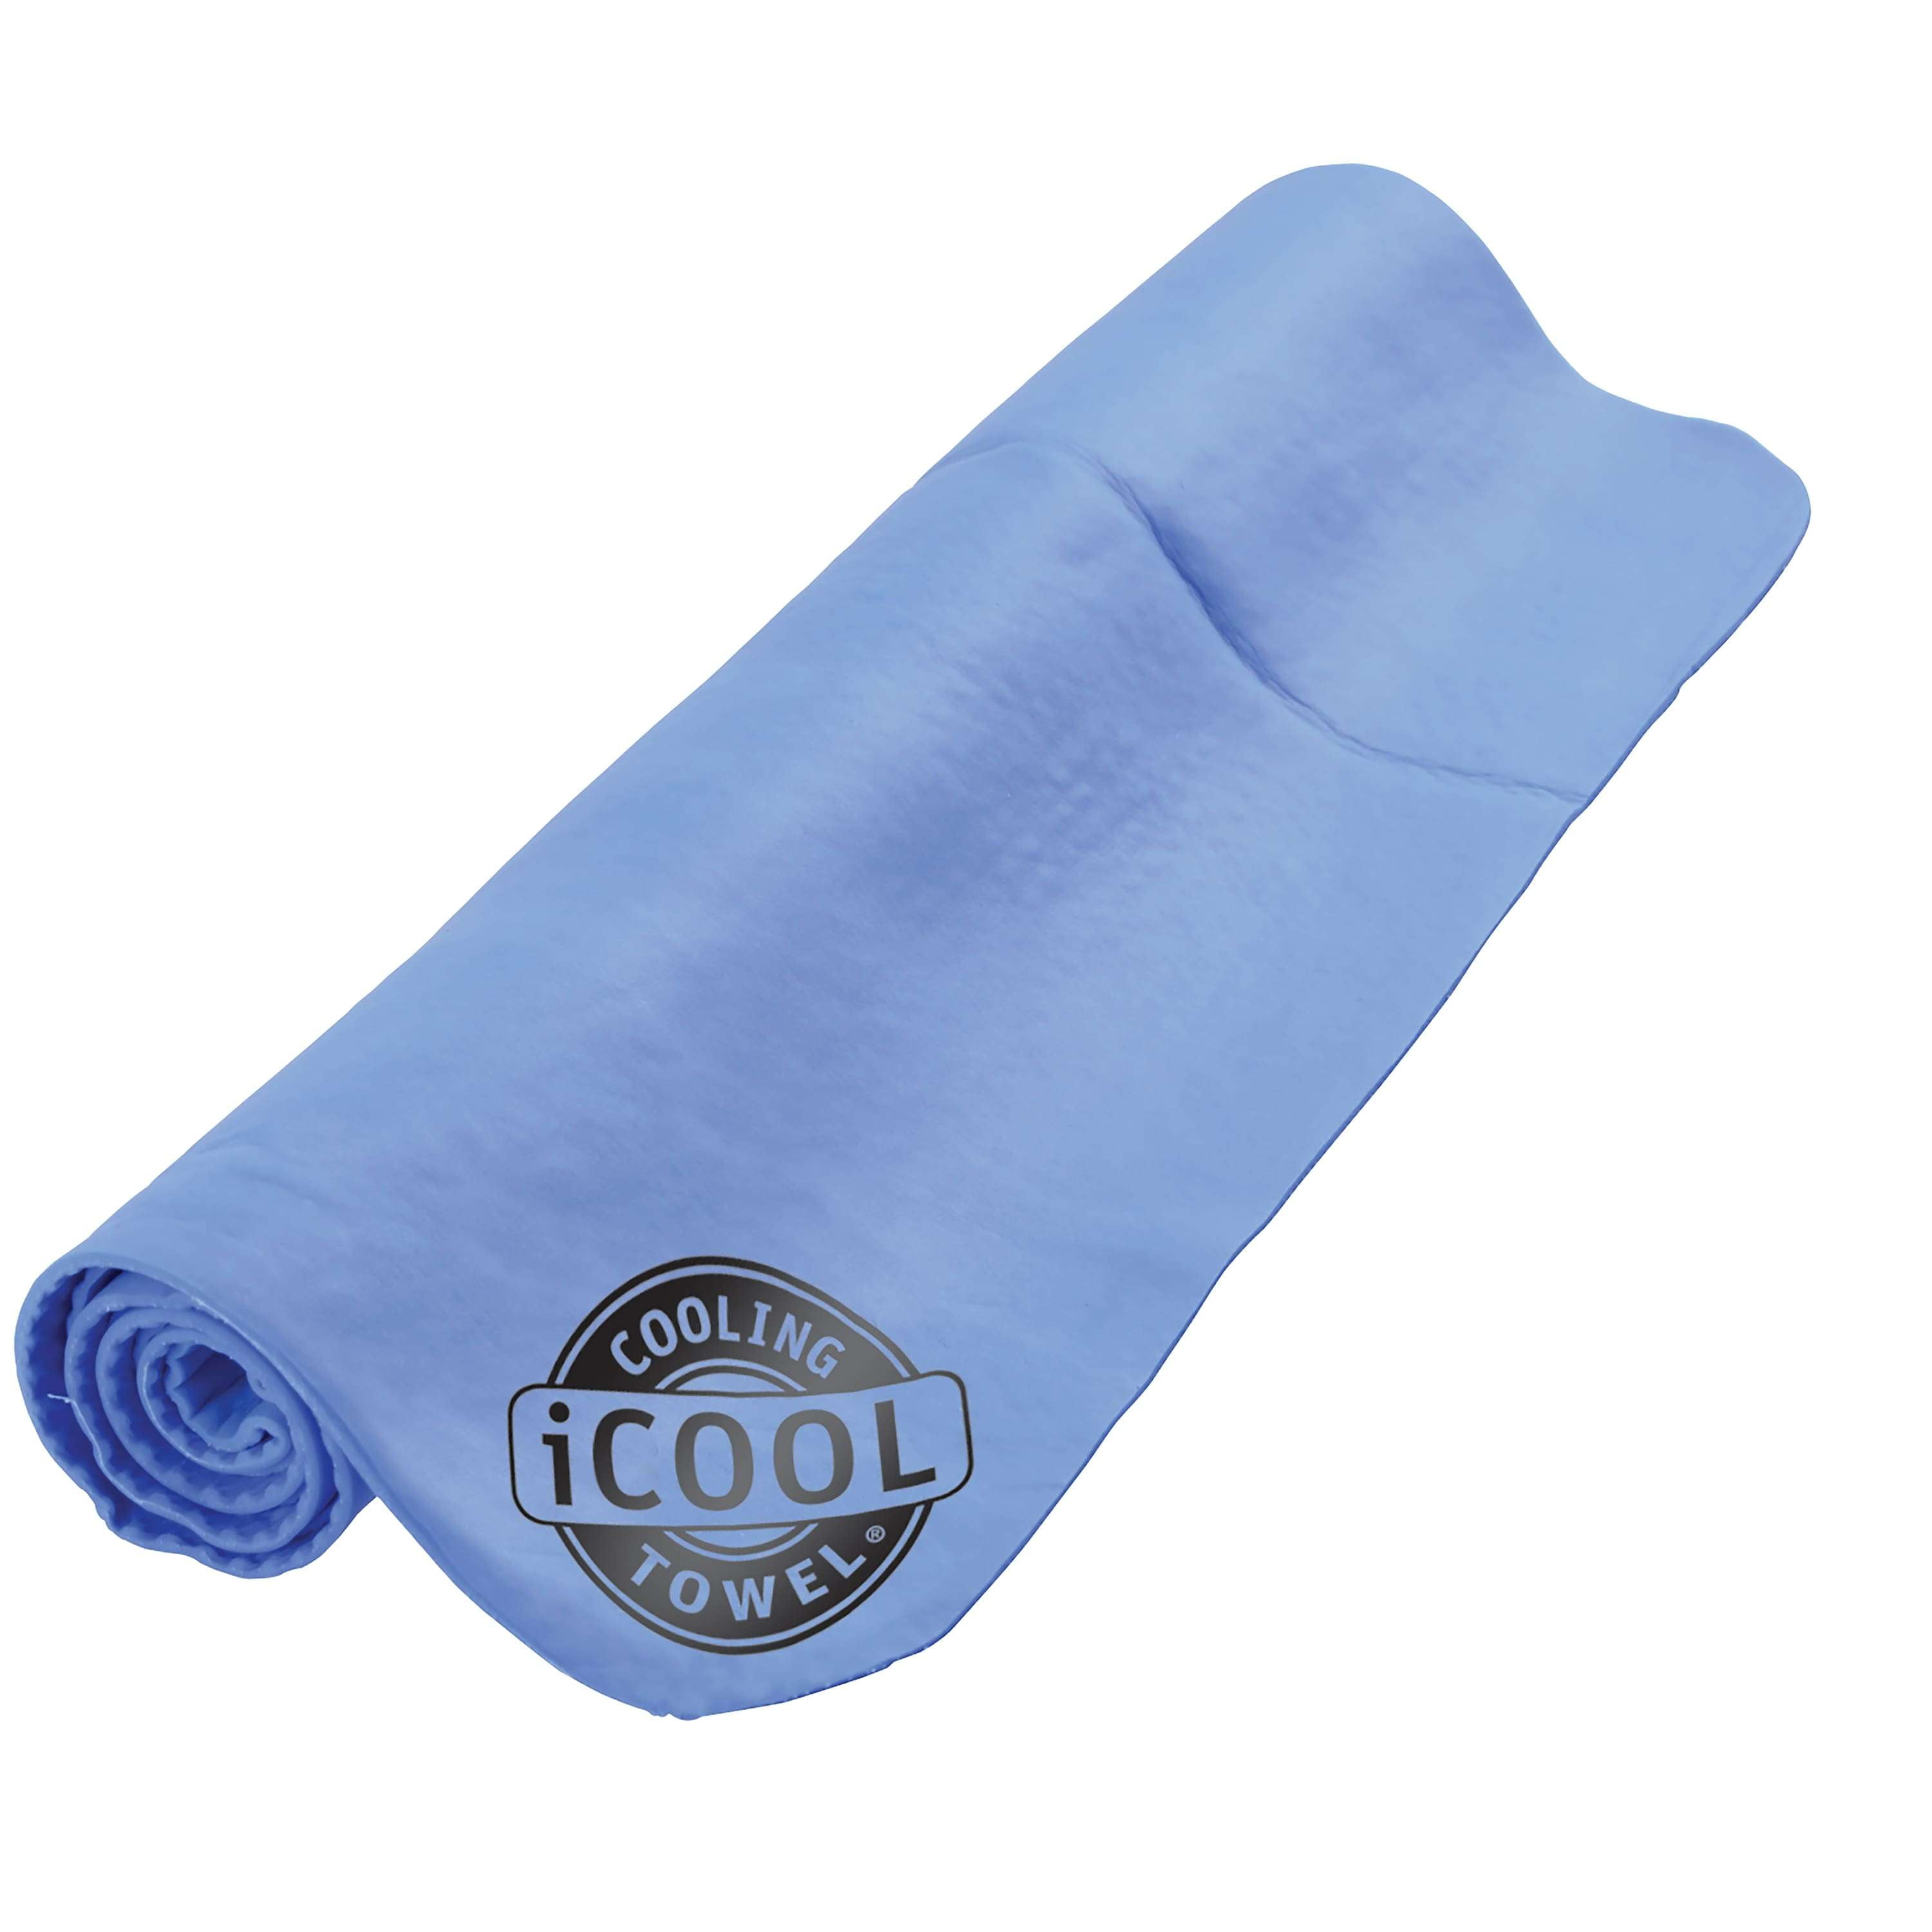 Cooling Towel Ice Chilly Sport Outdoor Neck Pad X Frogg Toggs 33 Headband Cooler 